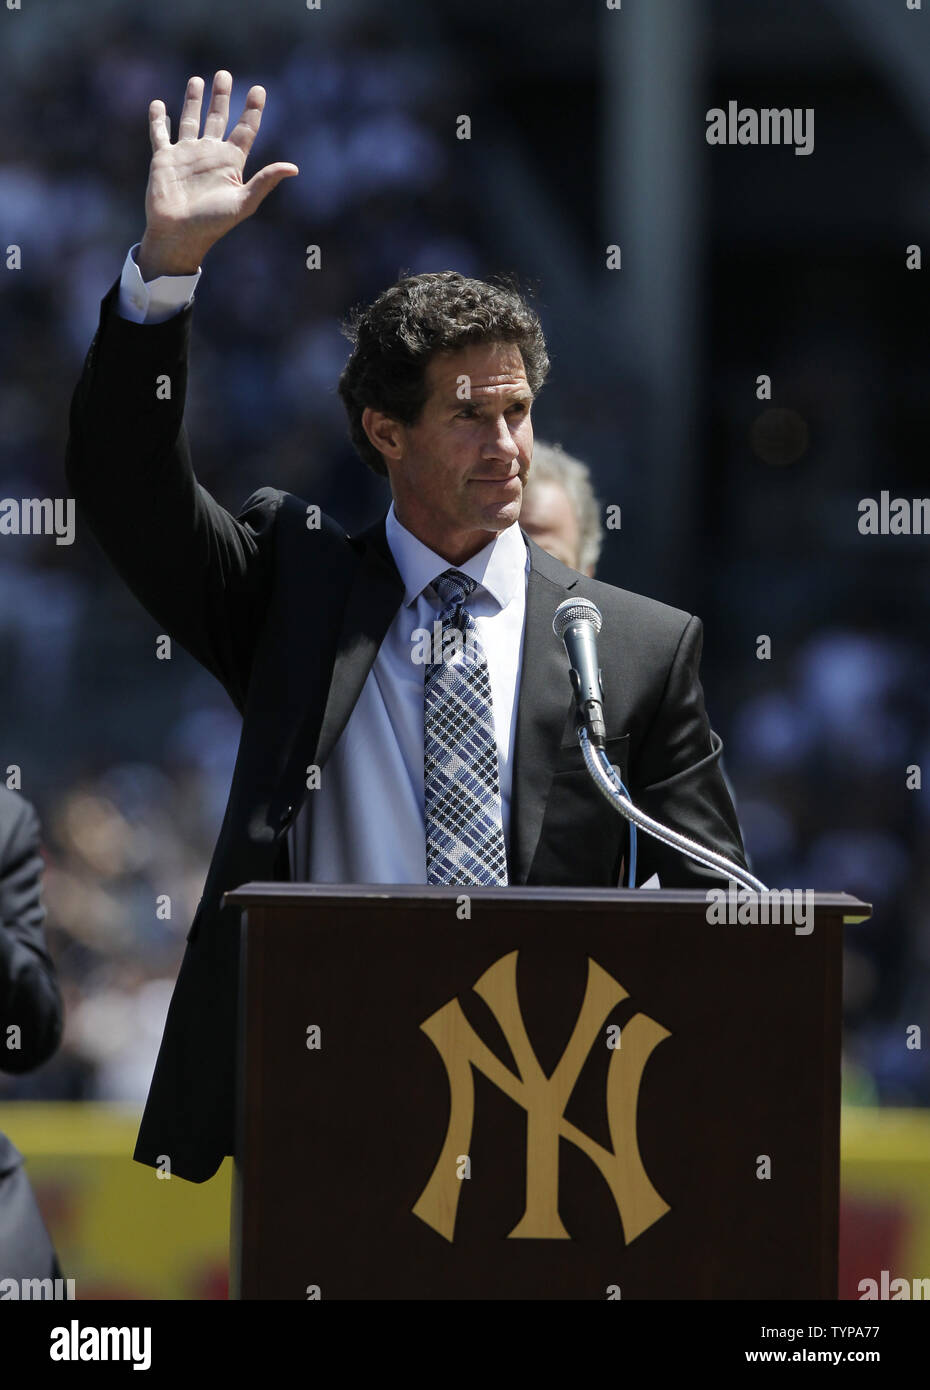 Retired New York Yankees player Paul O'Neill waves to fans after speaking at a ceremony inducting O'Neill into Monument Park with a new plaque before the game against the Cleveland Indians at Yankee Stadium in New York City on August 9, 2014. Monument Park is an open-air museum located at the new Yankee Stadium containing a collection of monuments, plaques, and retired numbers honoring distinguished members of the New York Yankees.    UPI/John Angelillo Stock Photo